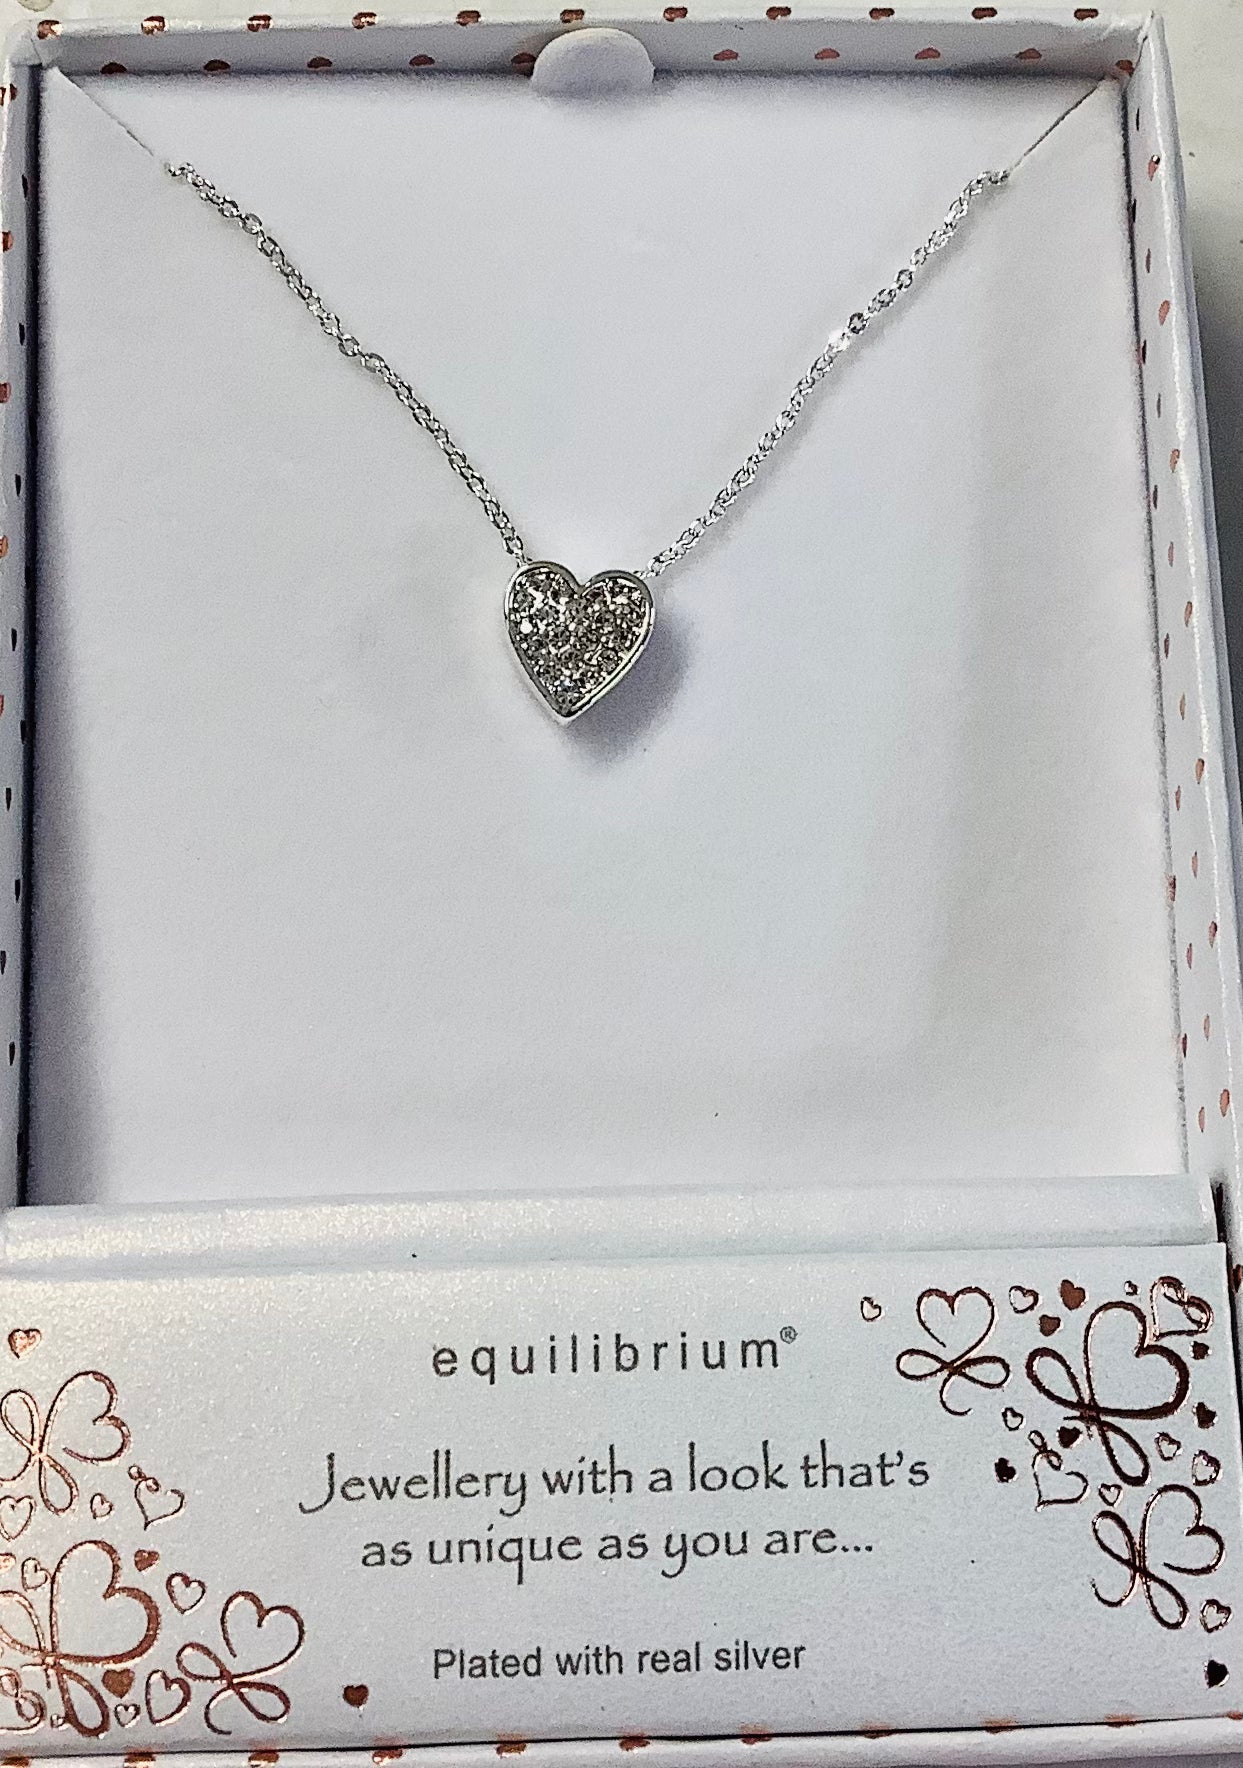 Equilibrium Glam Sparkle Plated Heart Necklace